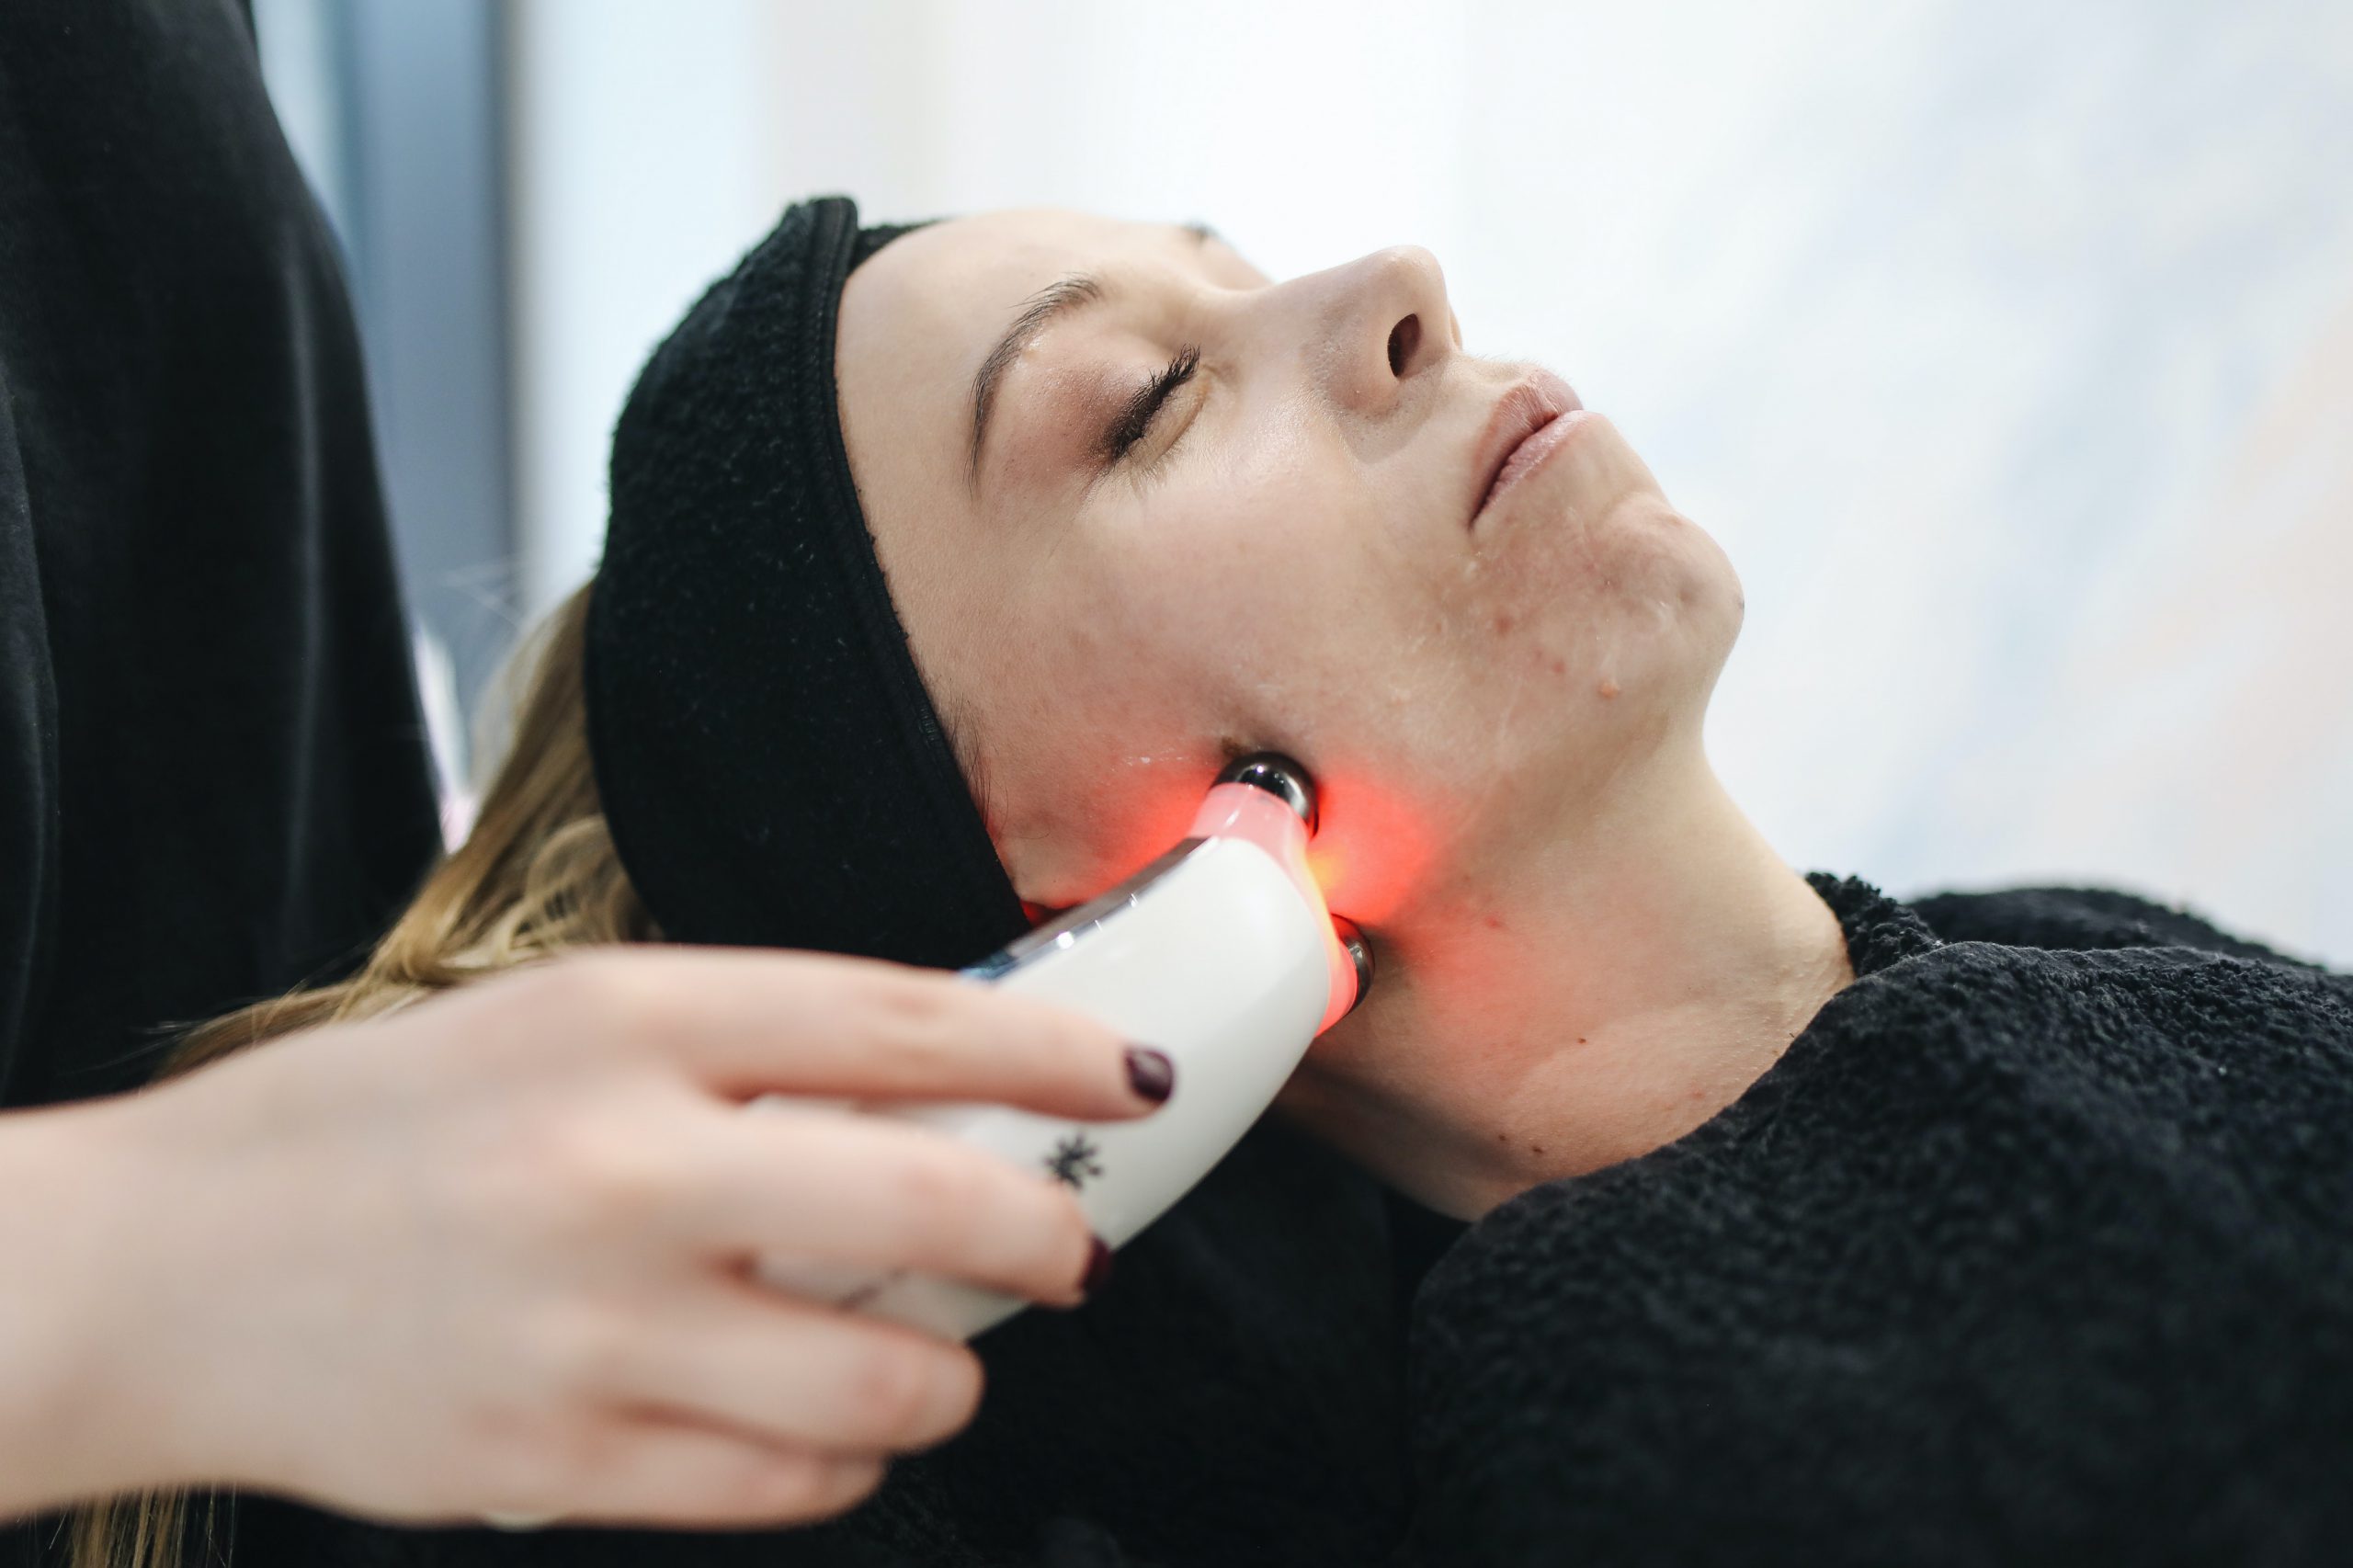 Laser Therapy as a Treatment for Tinnitus